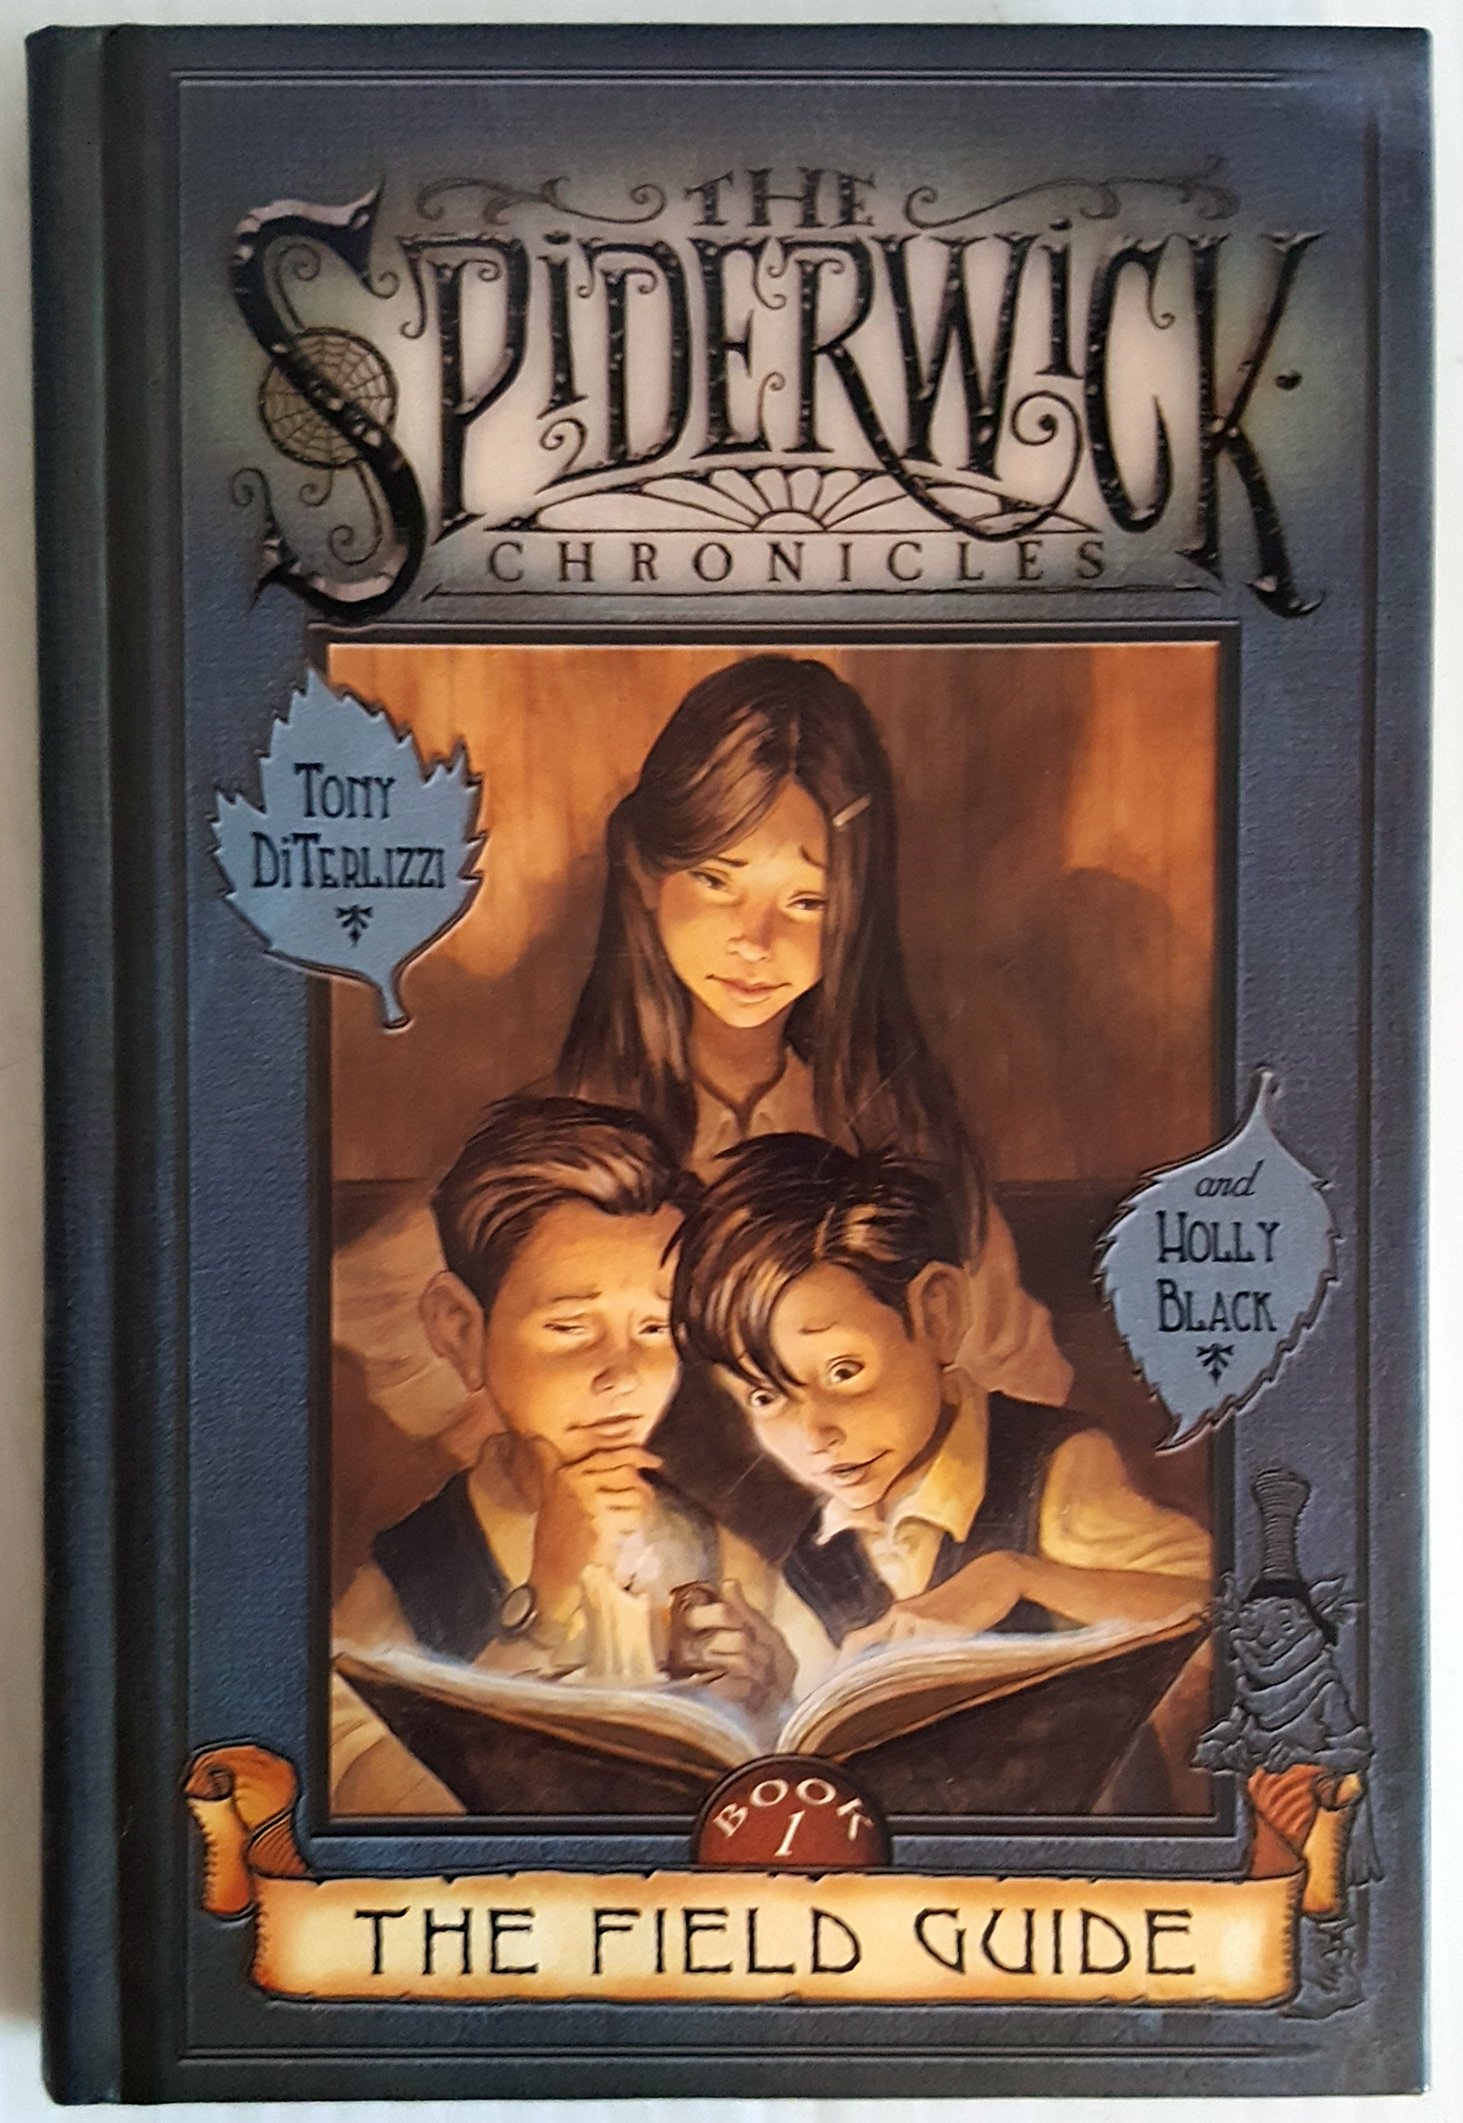 Cover image of the book, The Spiderwick Chronicles: The Field Guide